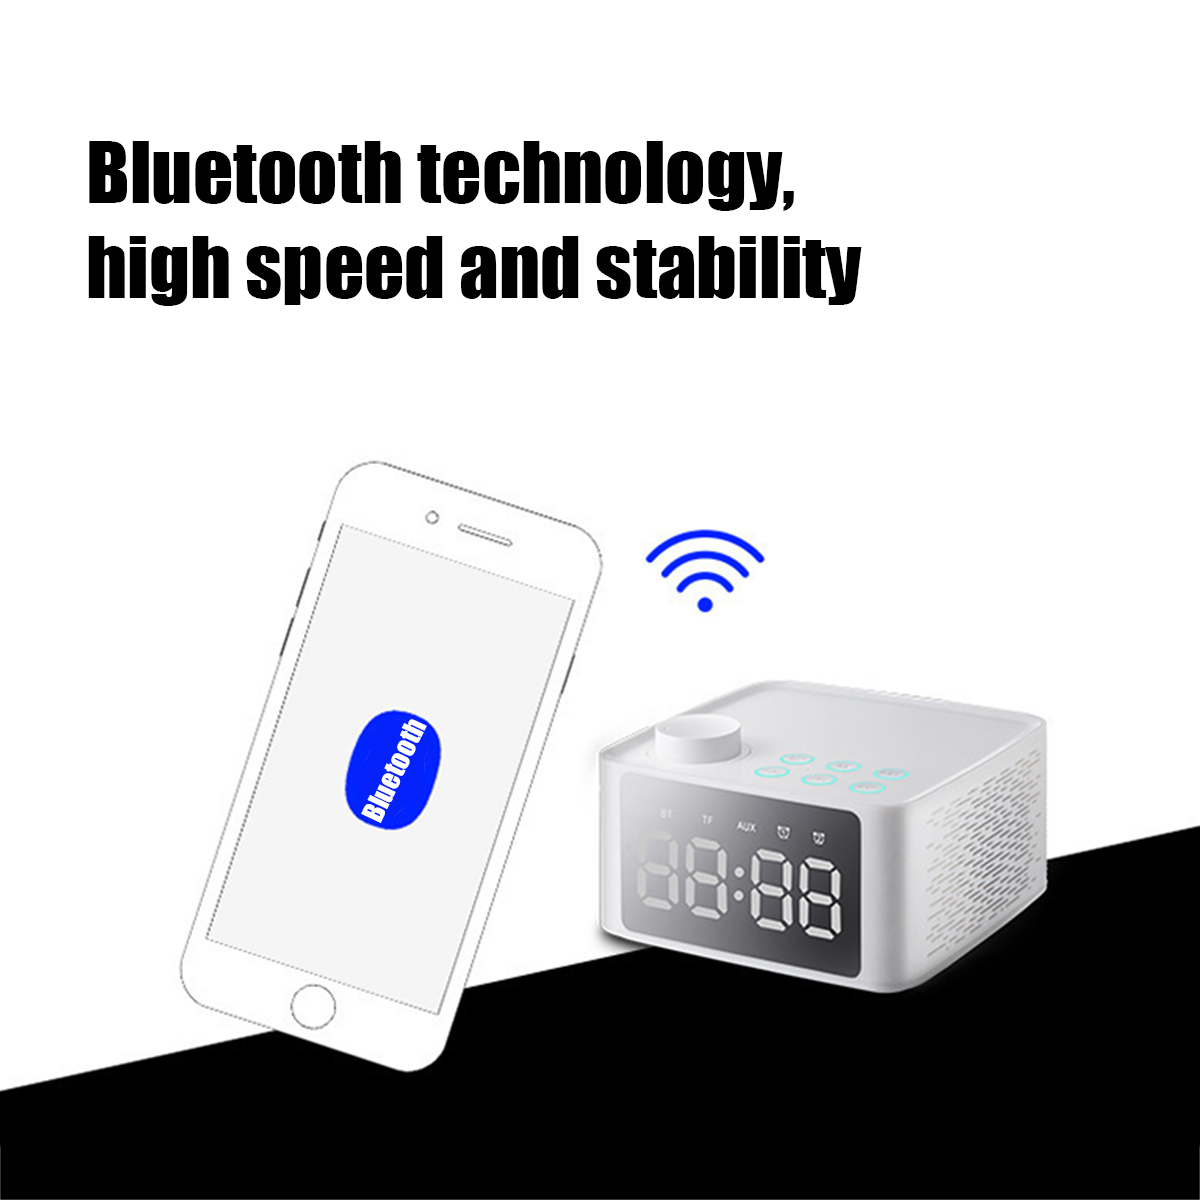 2-In-1-Wireless-Stereo-bluetooth-50-Speaker-Dual-Alarm-Clock-Subwoofer-Hifi-Music-Player-With-Phone--1432185-3